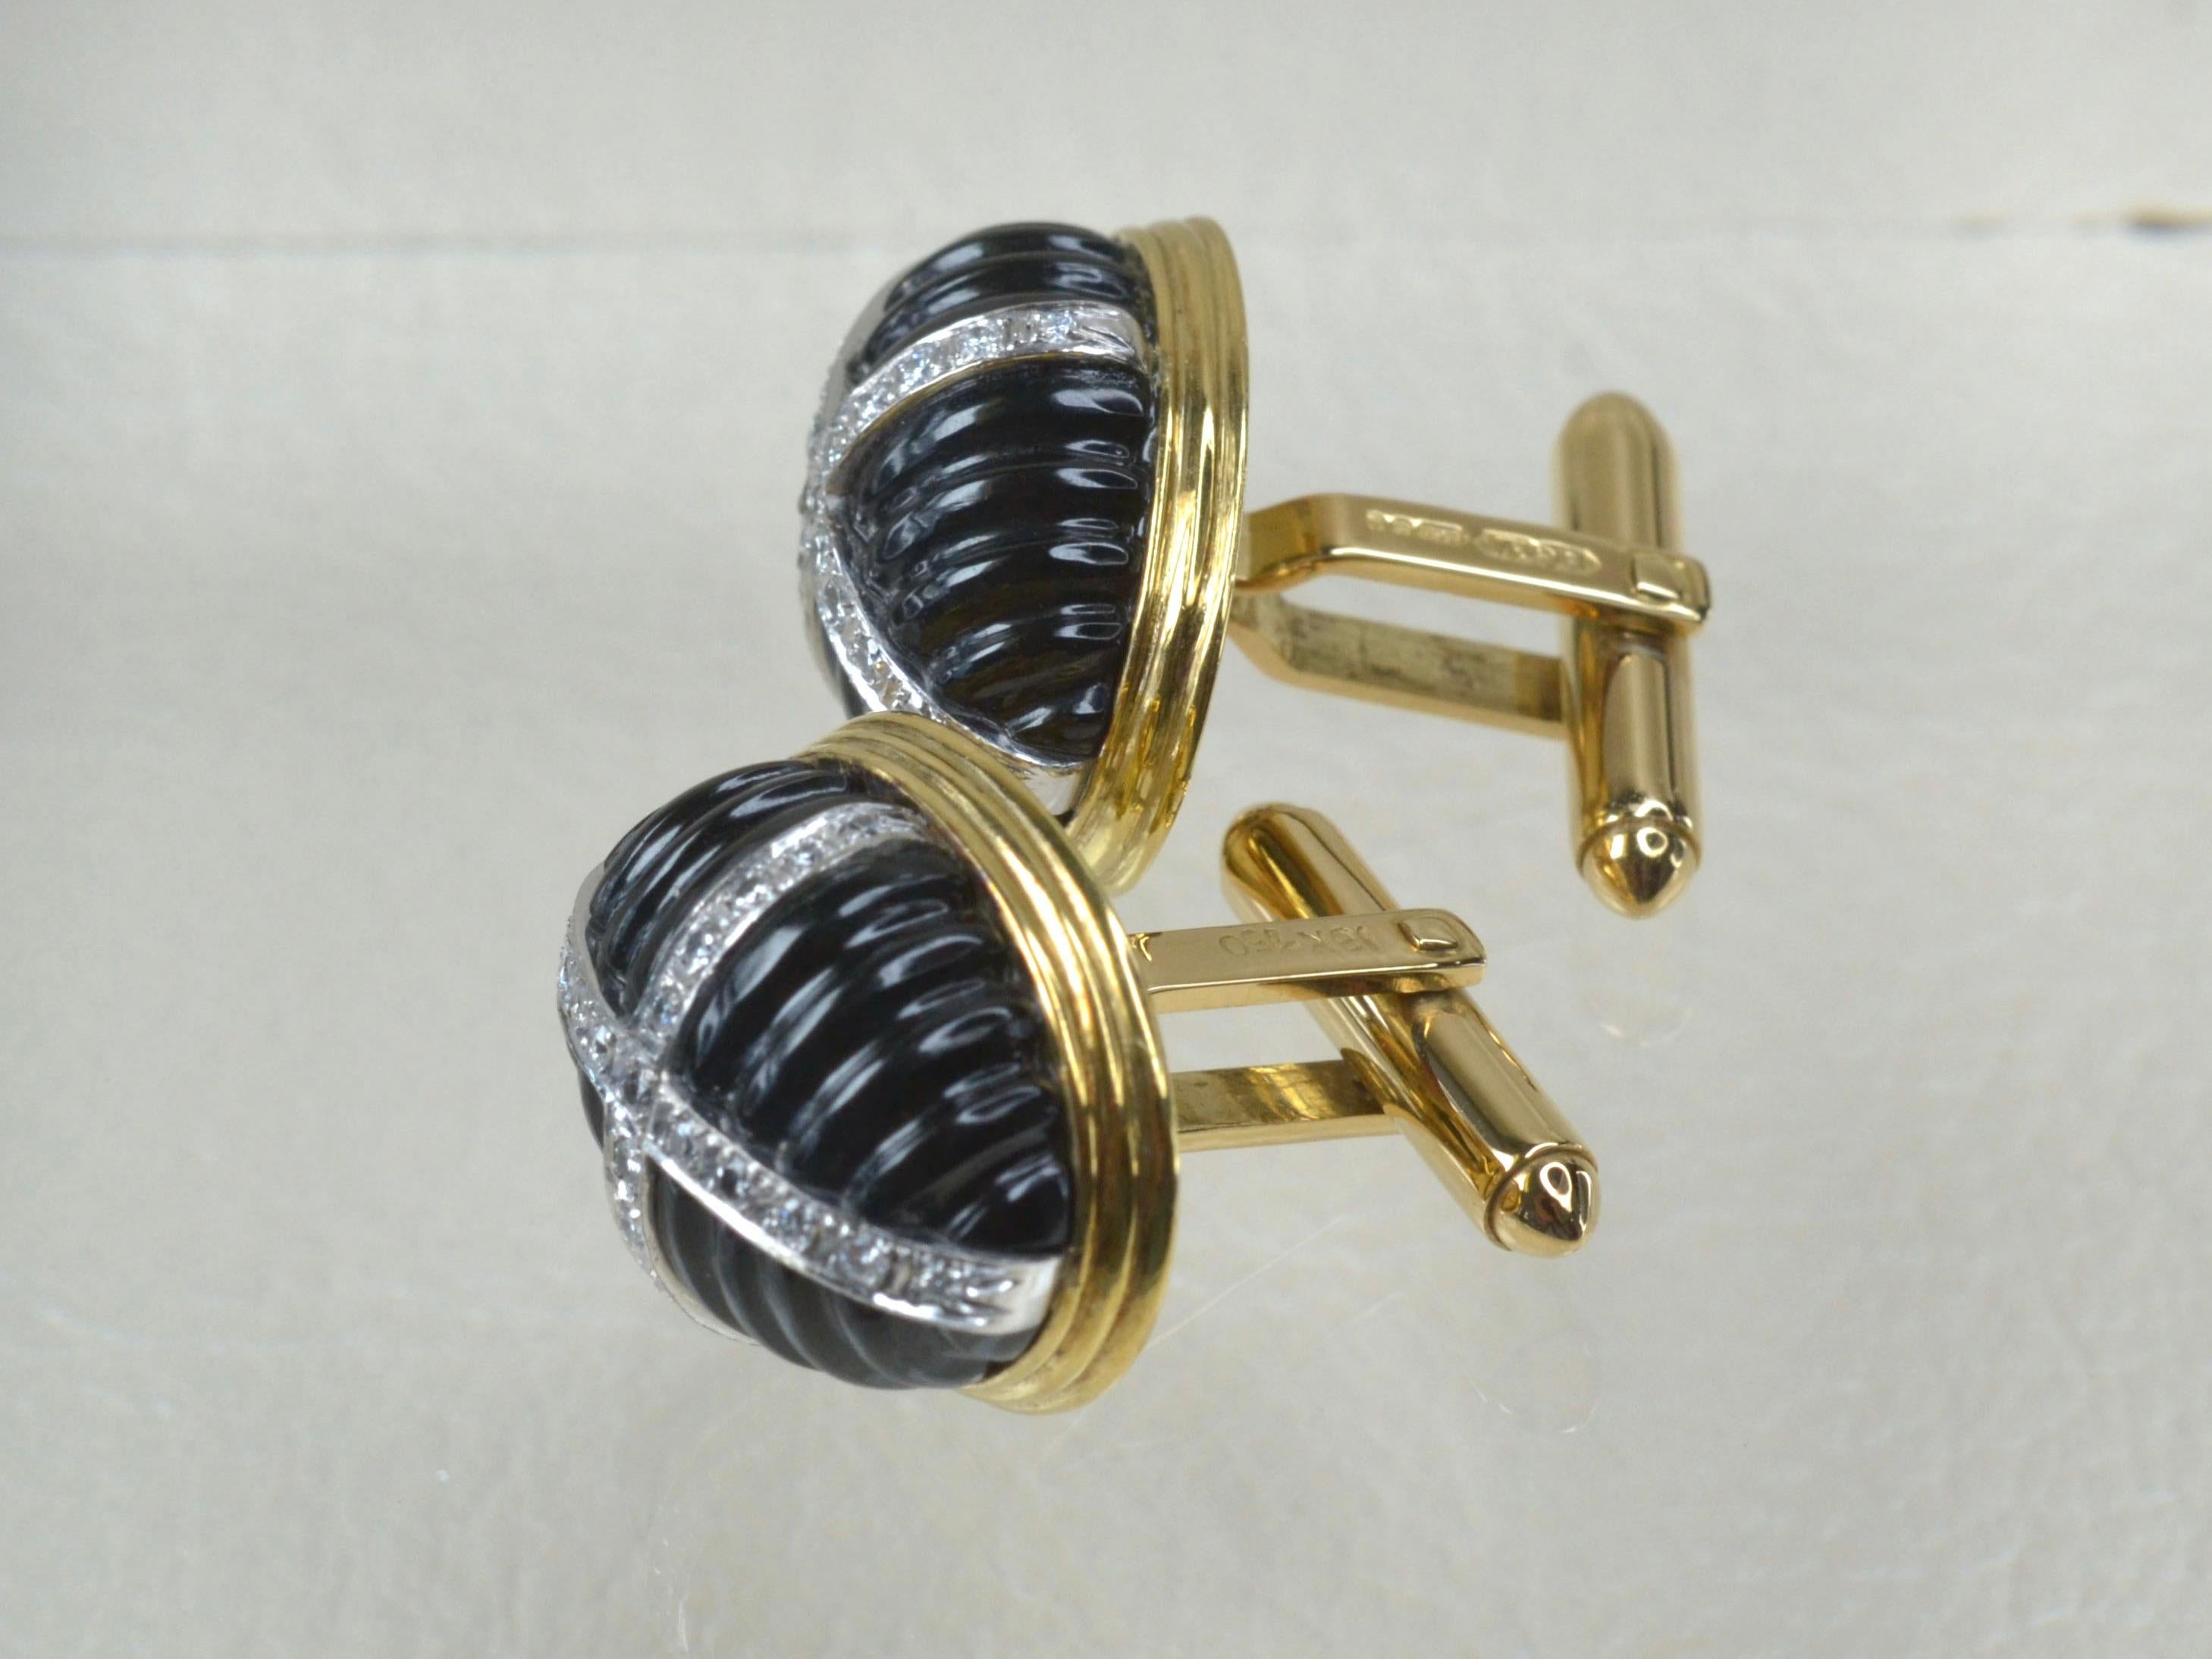 18K Gold unisex, statement cufflinks. 
The face of each cufflink features 22mm x 11mm, raised 10mm carved Black Onyx. Each decorated with a cross of twenety-one white Diamonds, set with 4-grains in White Gold. 
The cufflinks feature a combination of